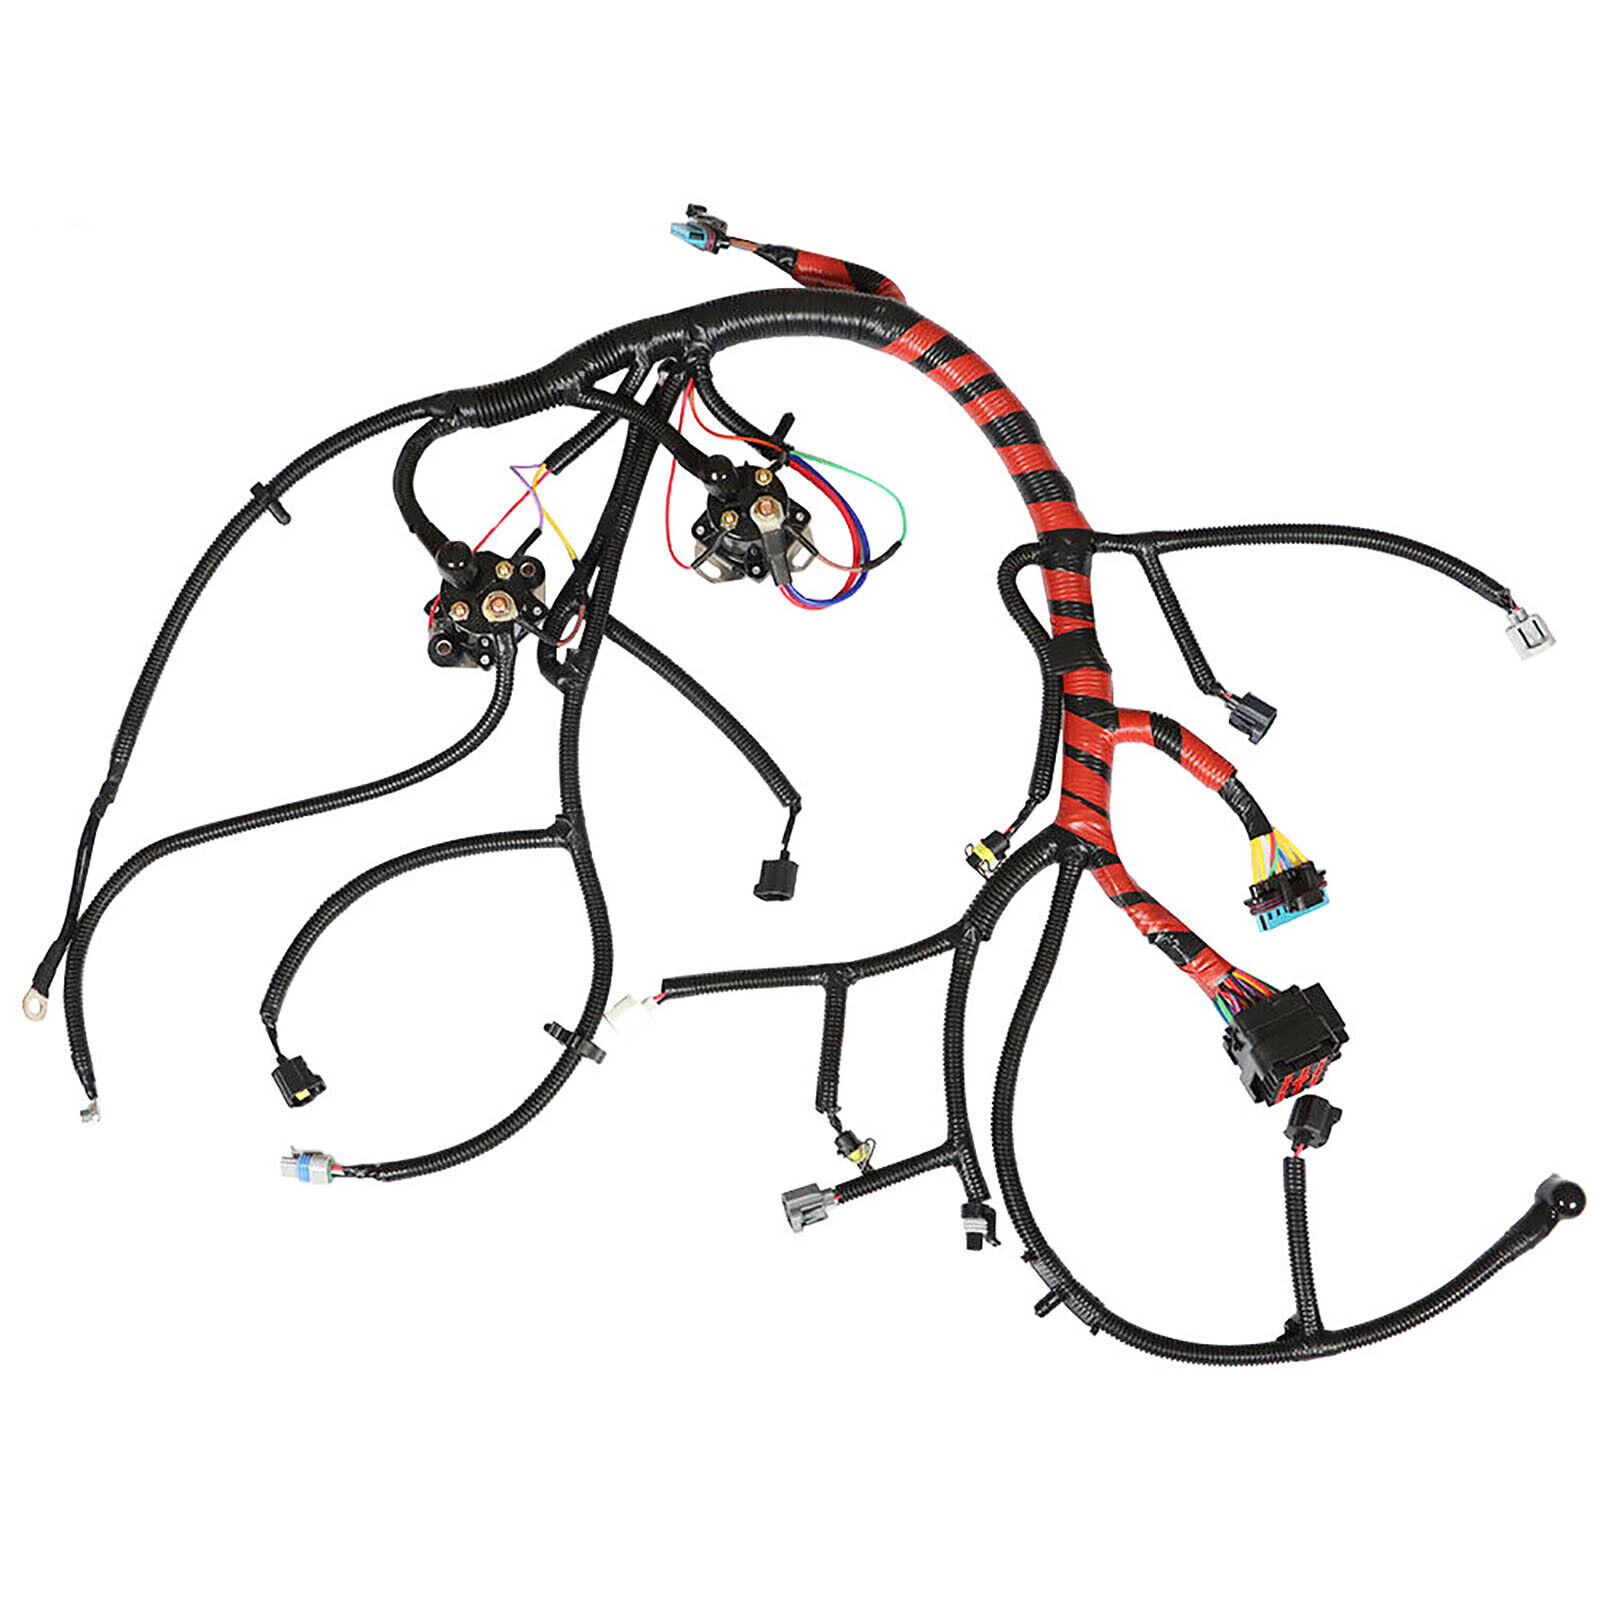 New Main Engine Wiring Harness for Ford F-250 F-350 Super Duty Pickup Truck SUV